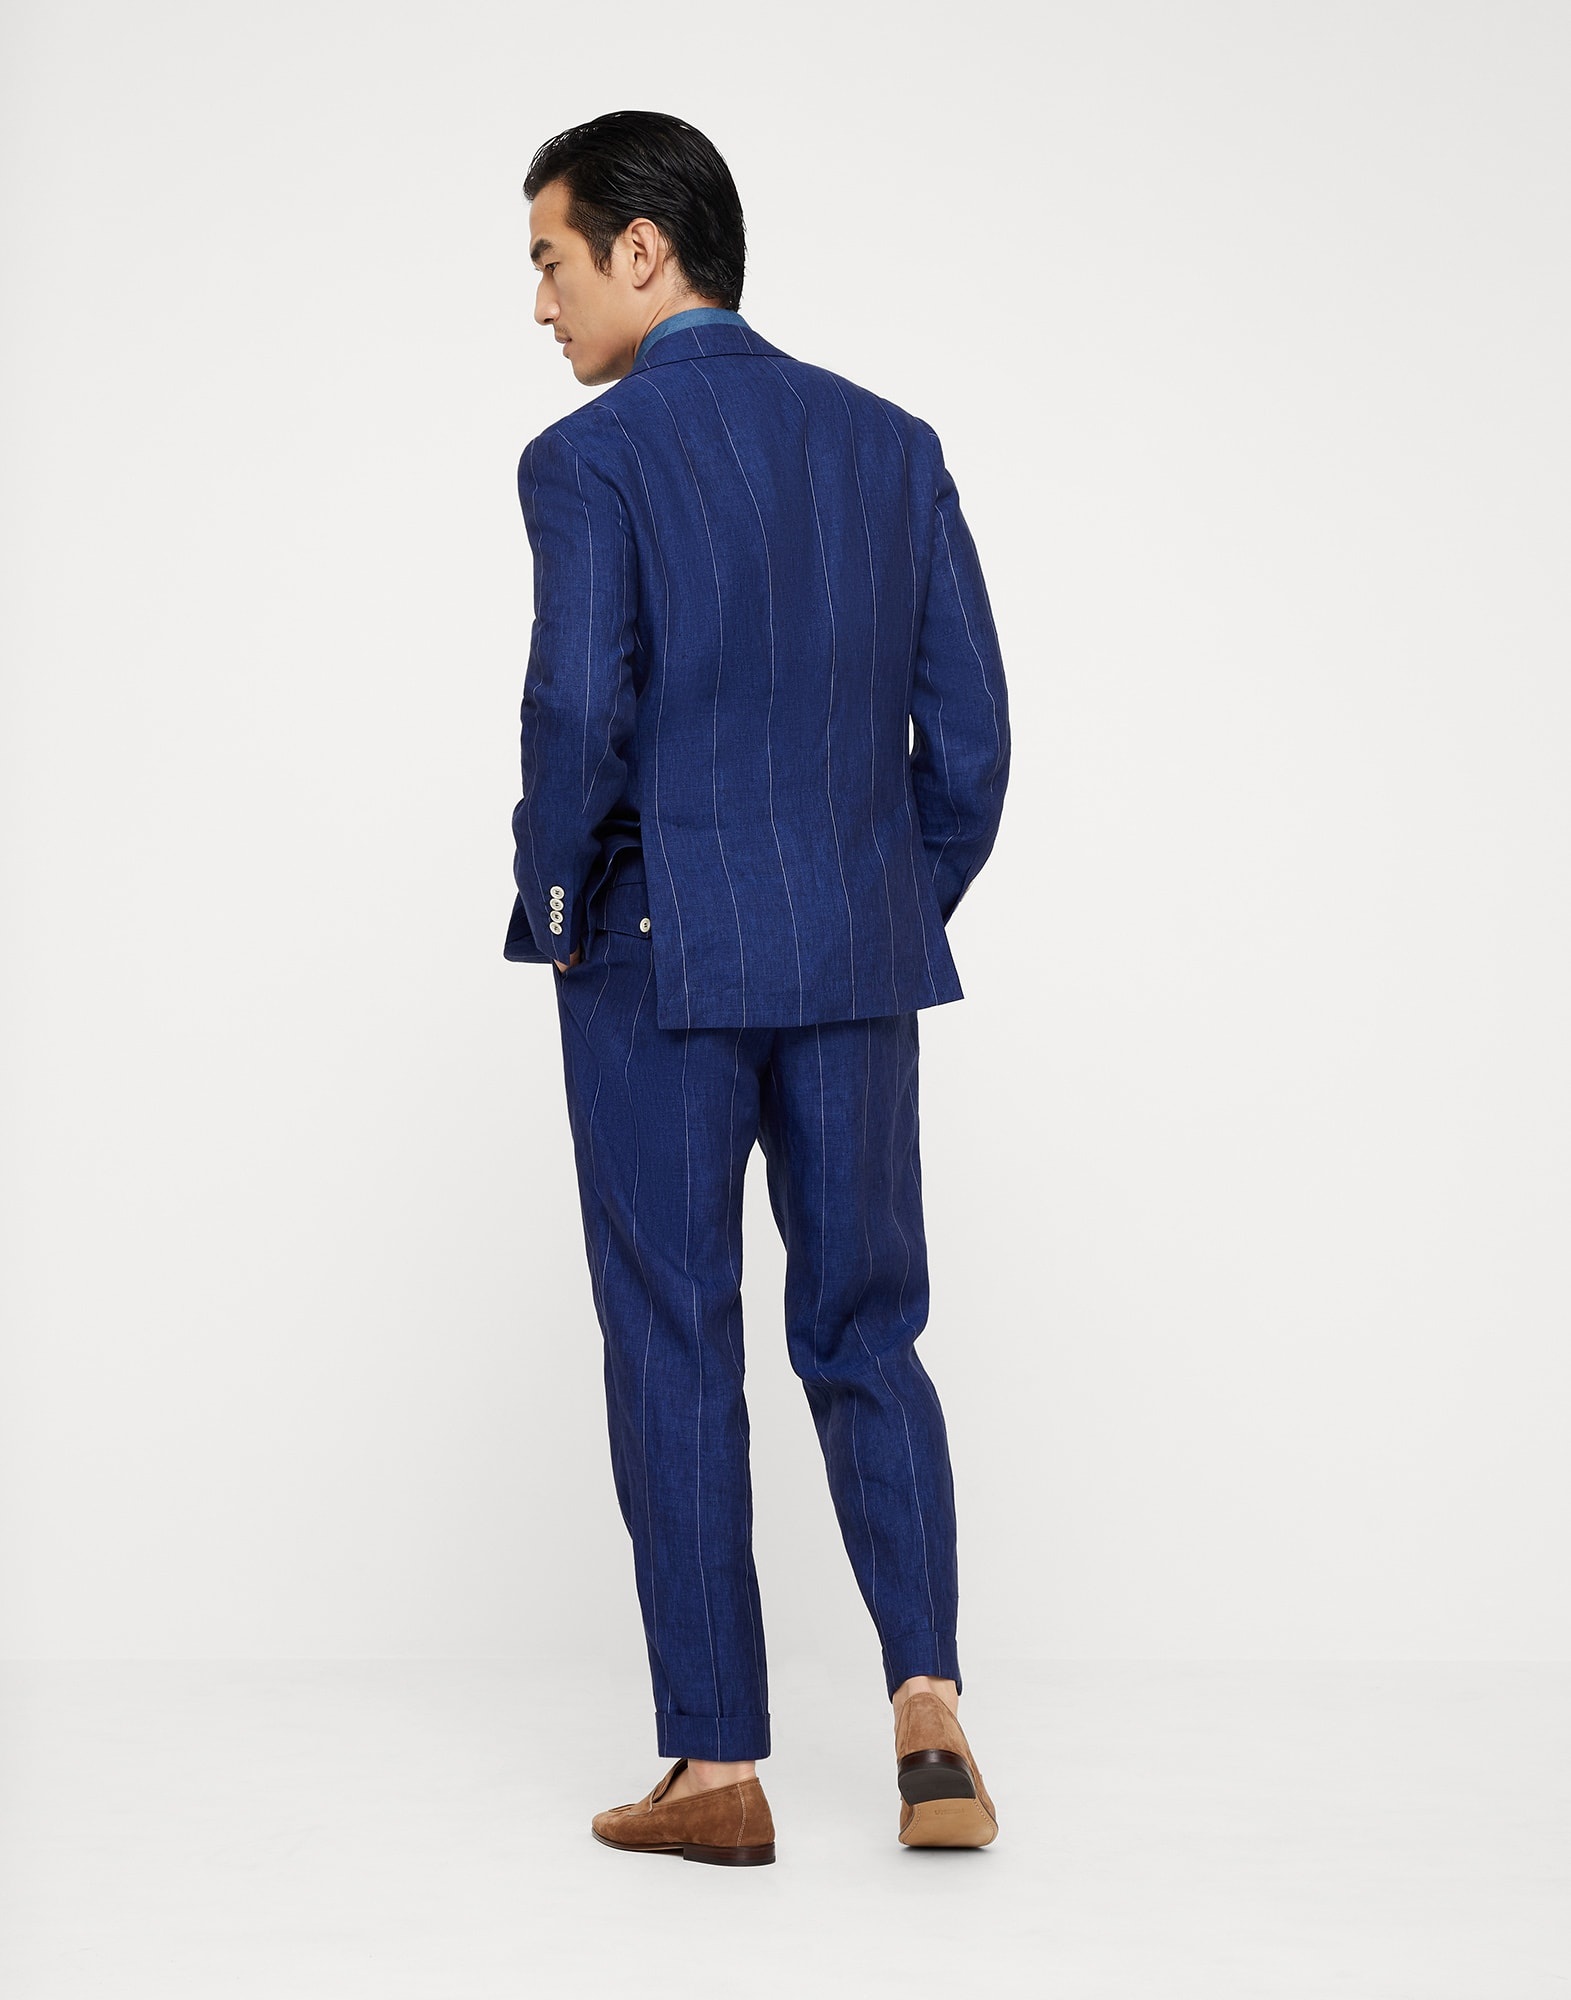 Linen wide chalk stripe Leisure suit: deconstructed jacket and double-pleated trousers with tabbed w - 2